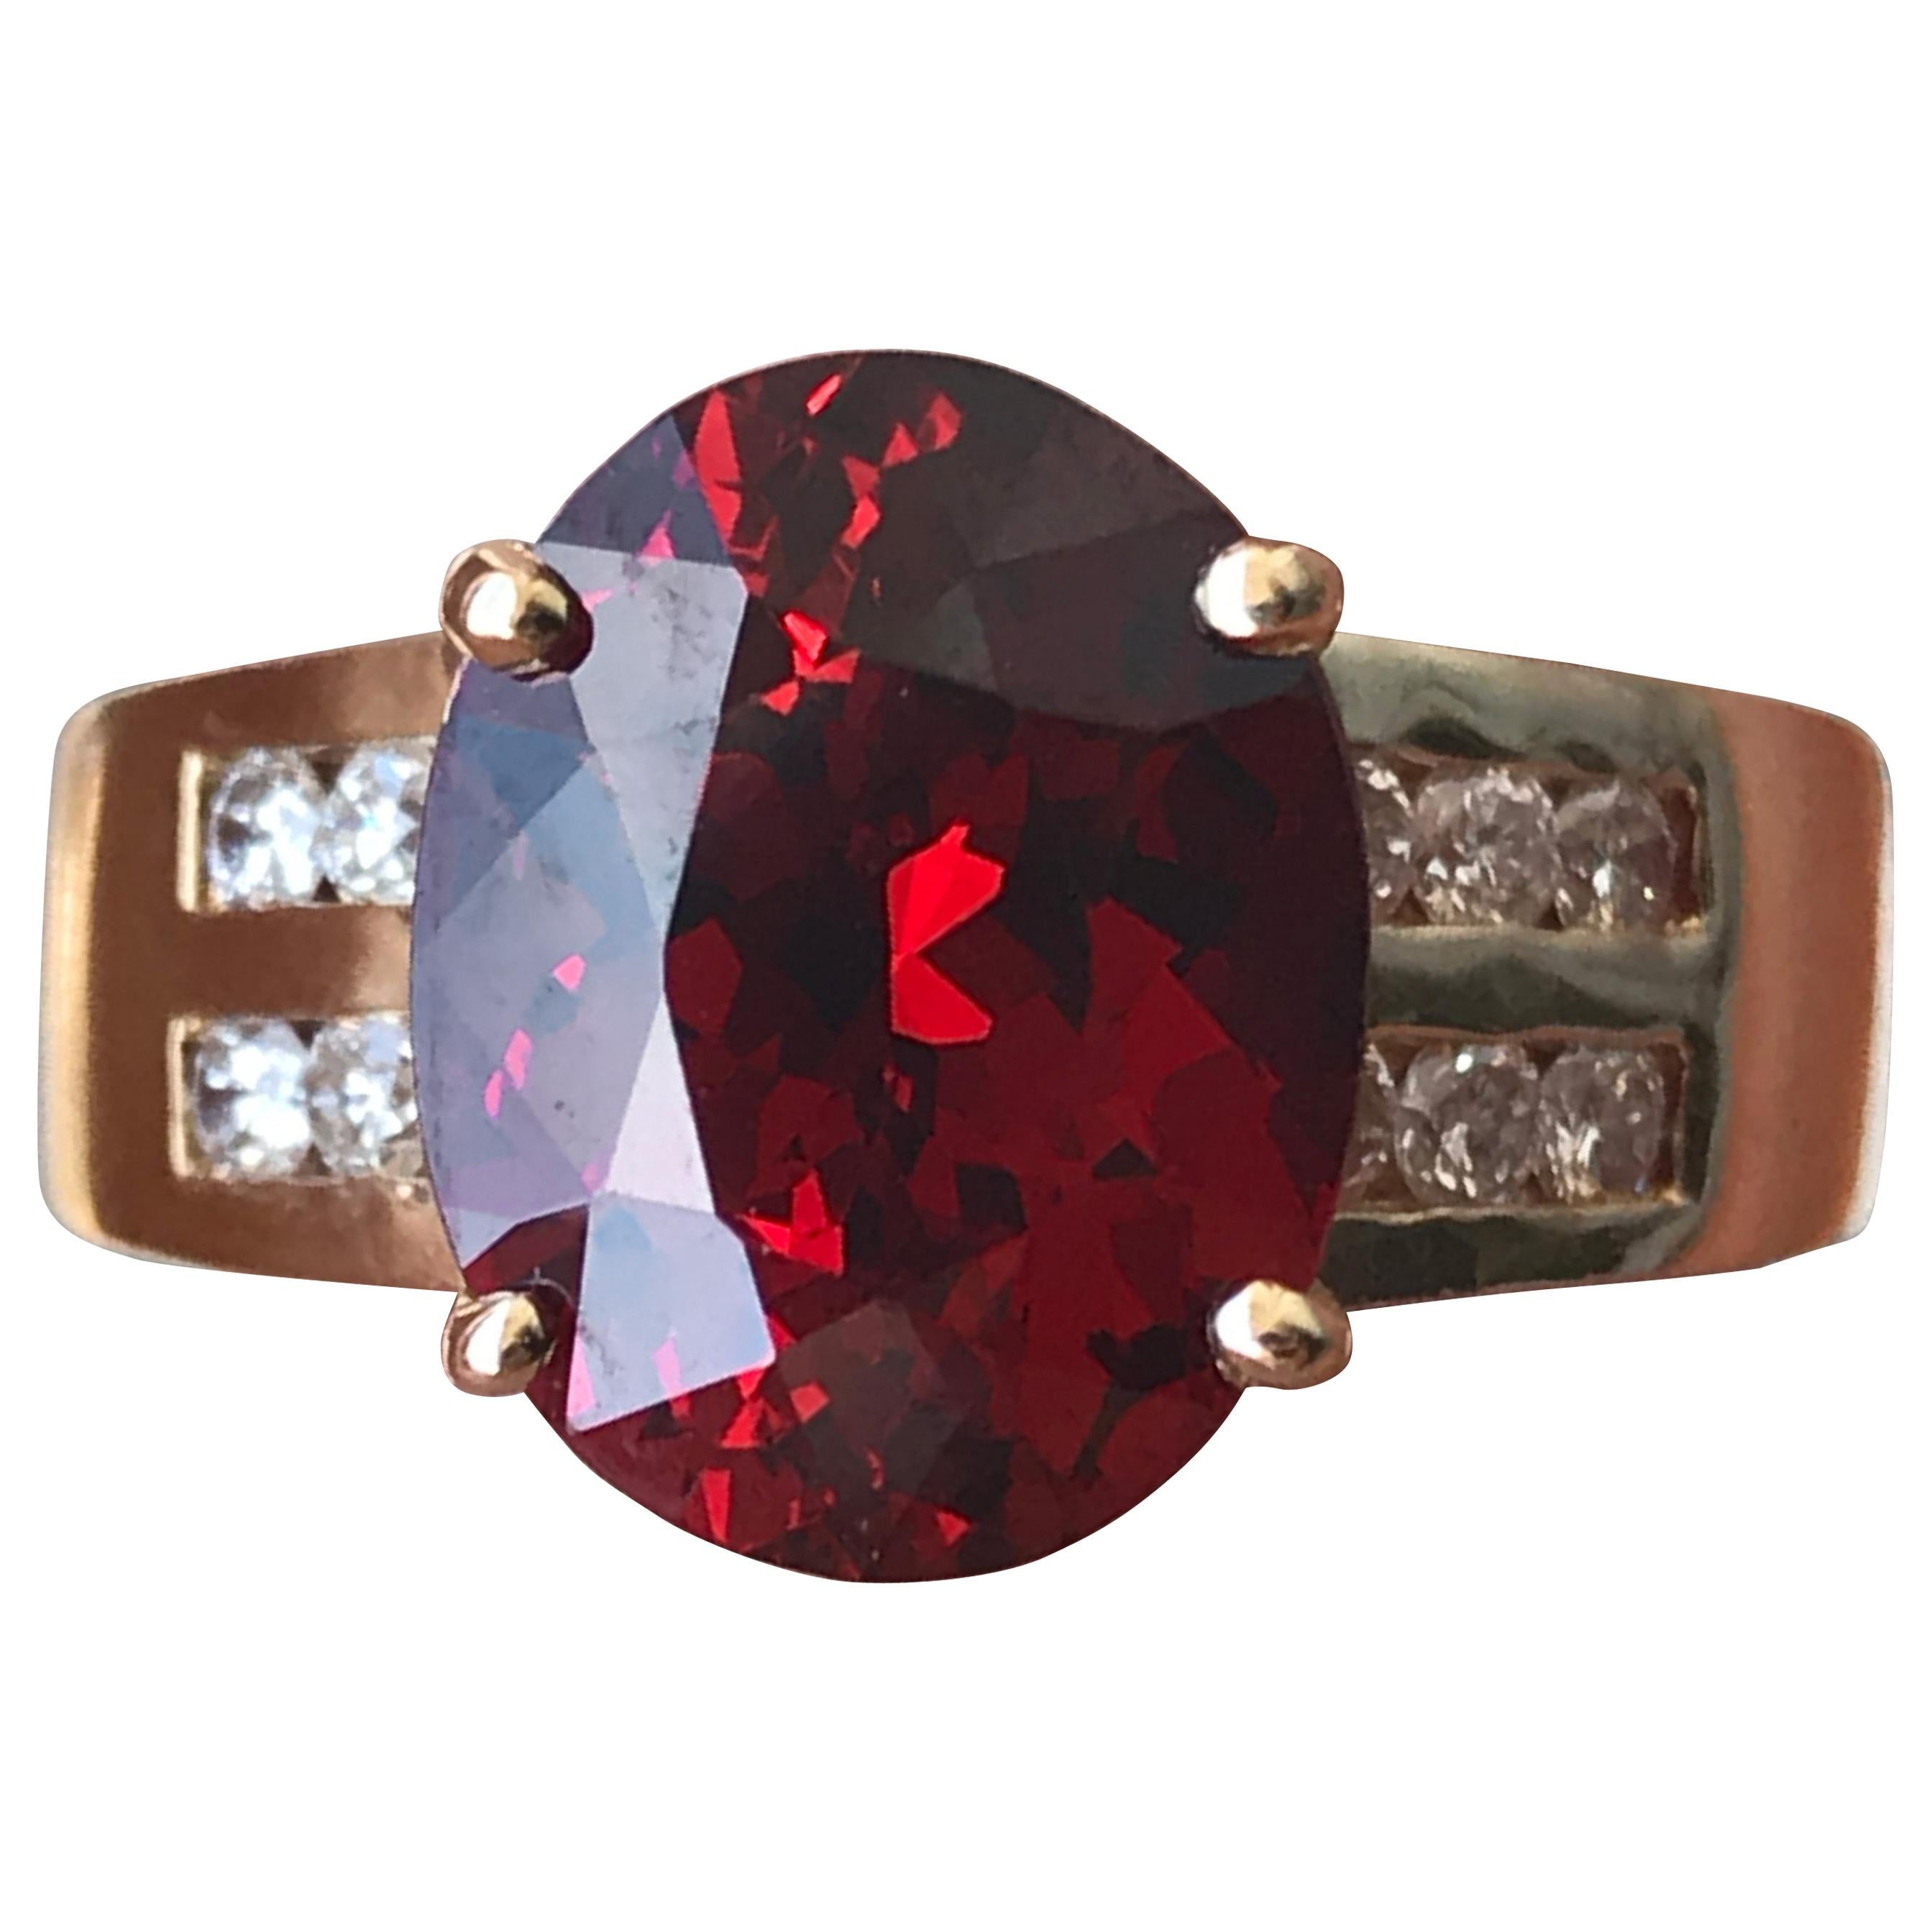 4.5 Carat Approximate Oval Red Garnet and Diamond Ring, Ben Dannie For Sale